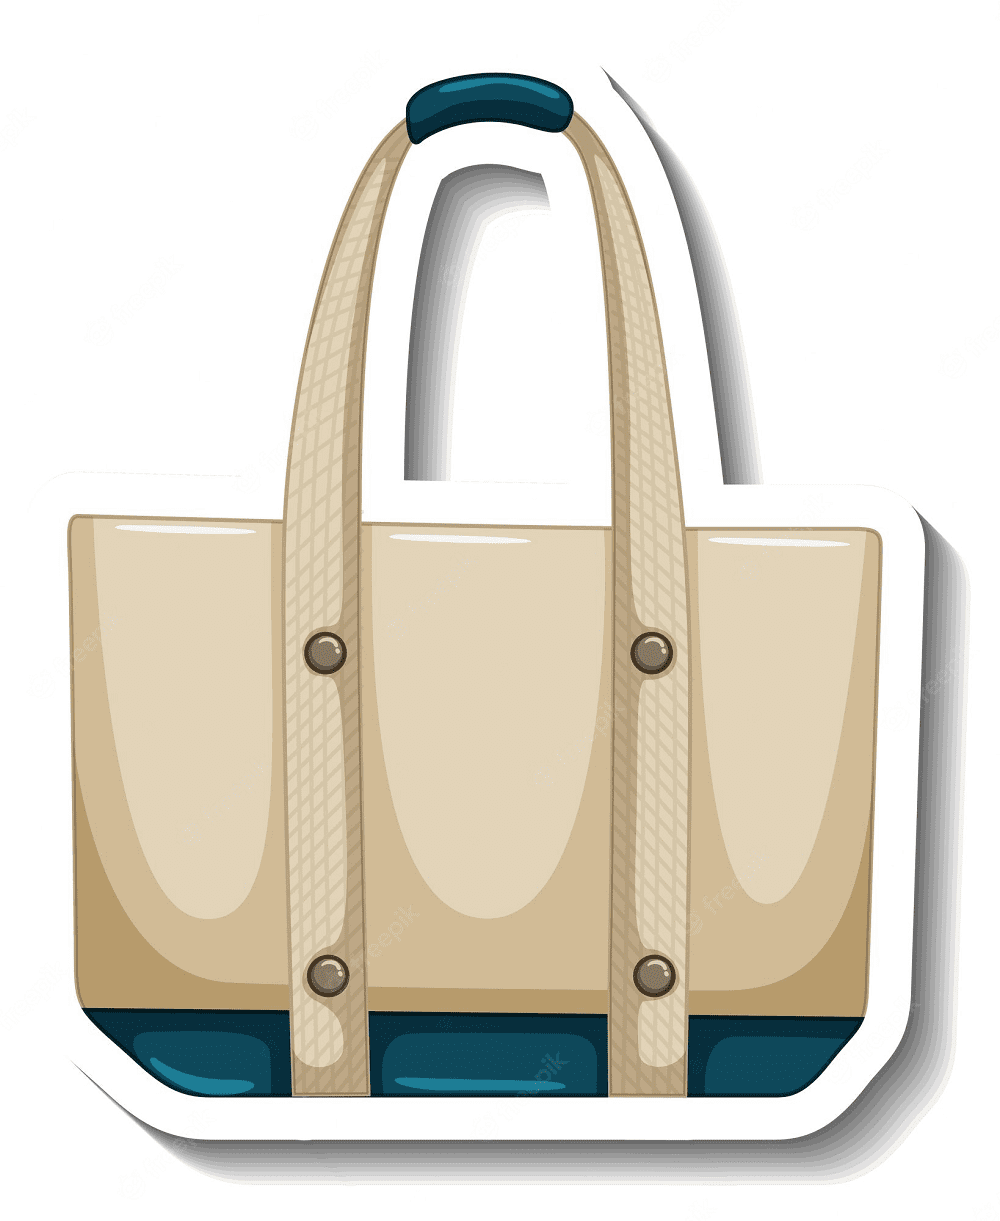 Clipart of Purse Image